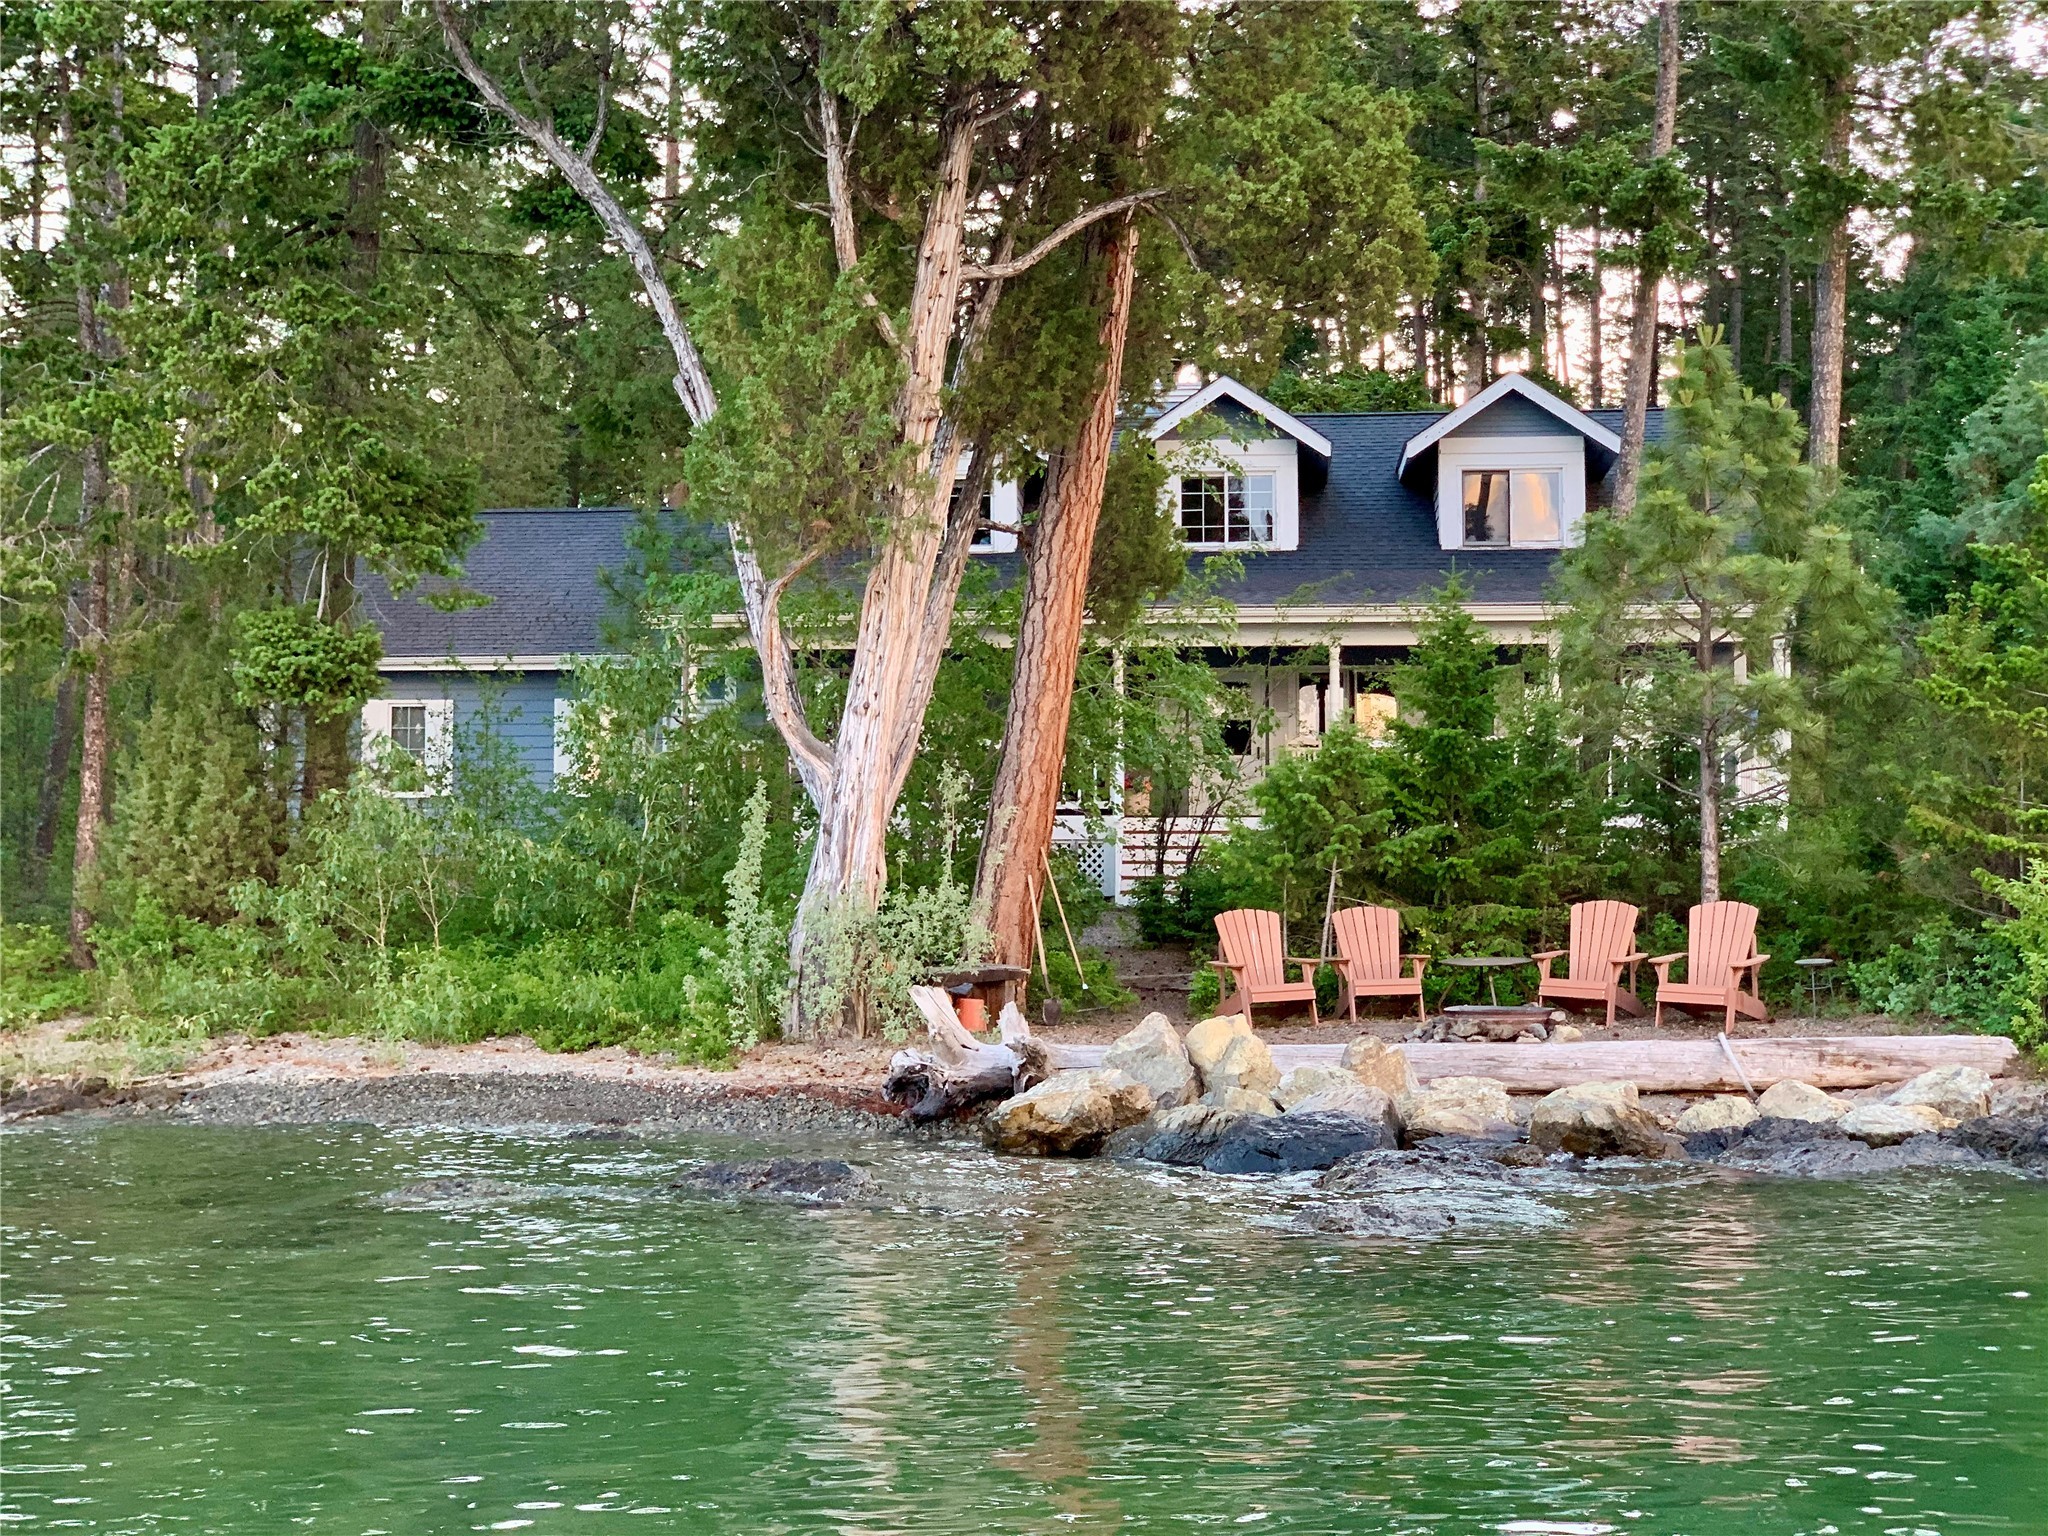 Experience the epitome of lakeside living at this picturesque Cape Cod style retreat, nestled on the tip of Caroline Point on the north side of Lakeside, Montana. 
Boasting 4 bedrooms and 2 bathrooms, along with an adorable sleeping cabin complete with a half bath, this well-appointed property also includes a garage for added convenience. Built in 1991 this home features breathtaking views of the lake and surrounding mountains, and a covered porch to host your dinners for family and friends.
Step outside onto the 175 feet of wraparound beachfront, complete with a private dock and boat lift, where you can indulge in a myriad of water sports or simply relax and take in the awe-inspiring scenery. 
Despite its secluded ambiance, this property is just a stone's throw away from the charming town of Lakeside, where you can enjoy dining, shopping, and a vibrant lakeside community atmosphere.  Contact Kelly Kennedy at 406-253-1203 or your real estate professional.